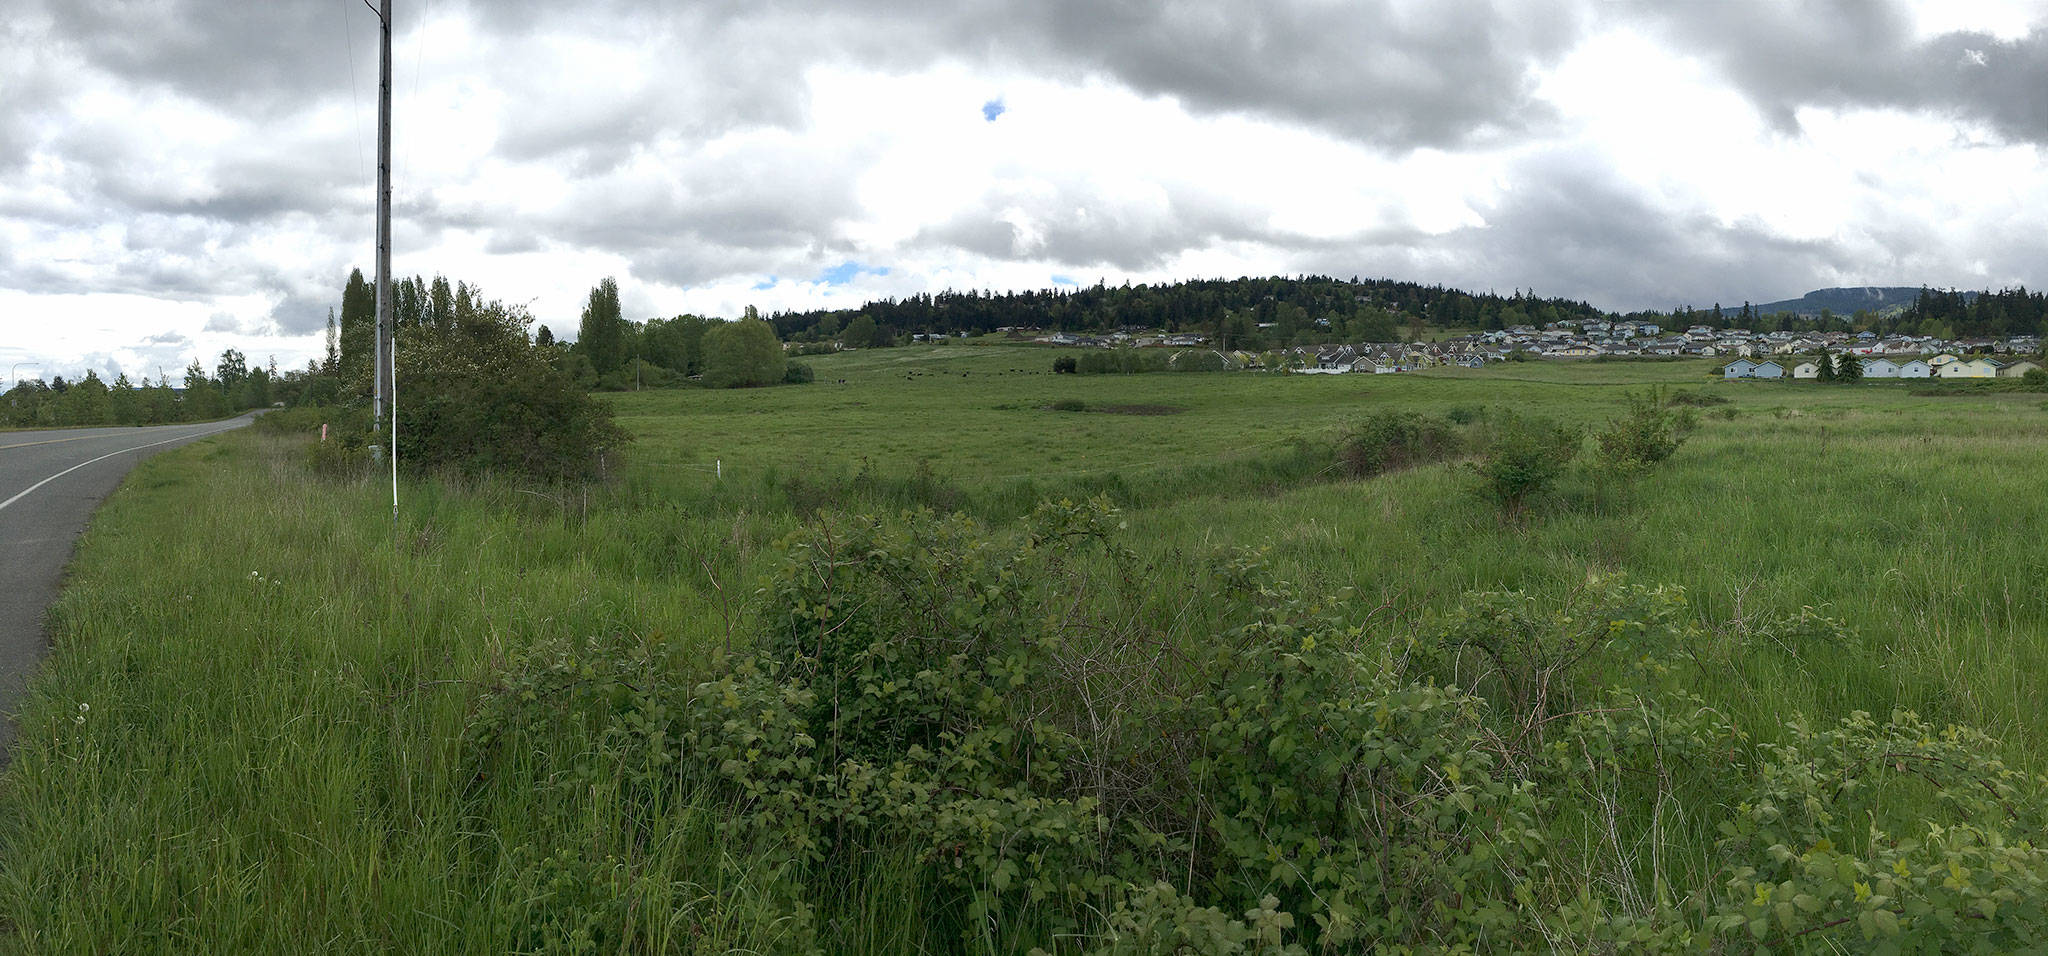 Bell Estates, a 103-home subdivision, would be built off Brownfield Road below Miller Road and Bell Hill within the city of Sequim’s limits. (Matthew Nash/Olympic Peninsula News Group)